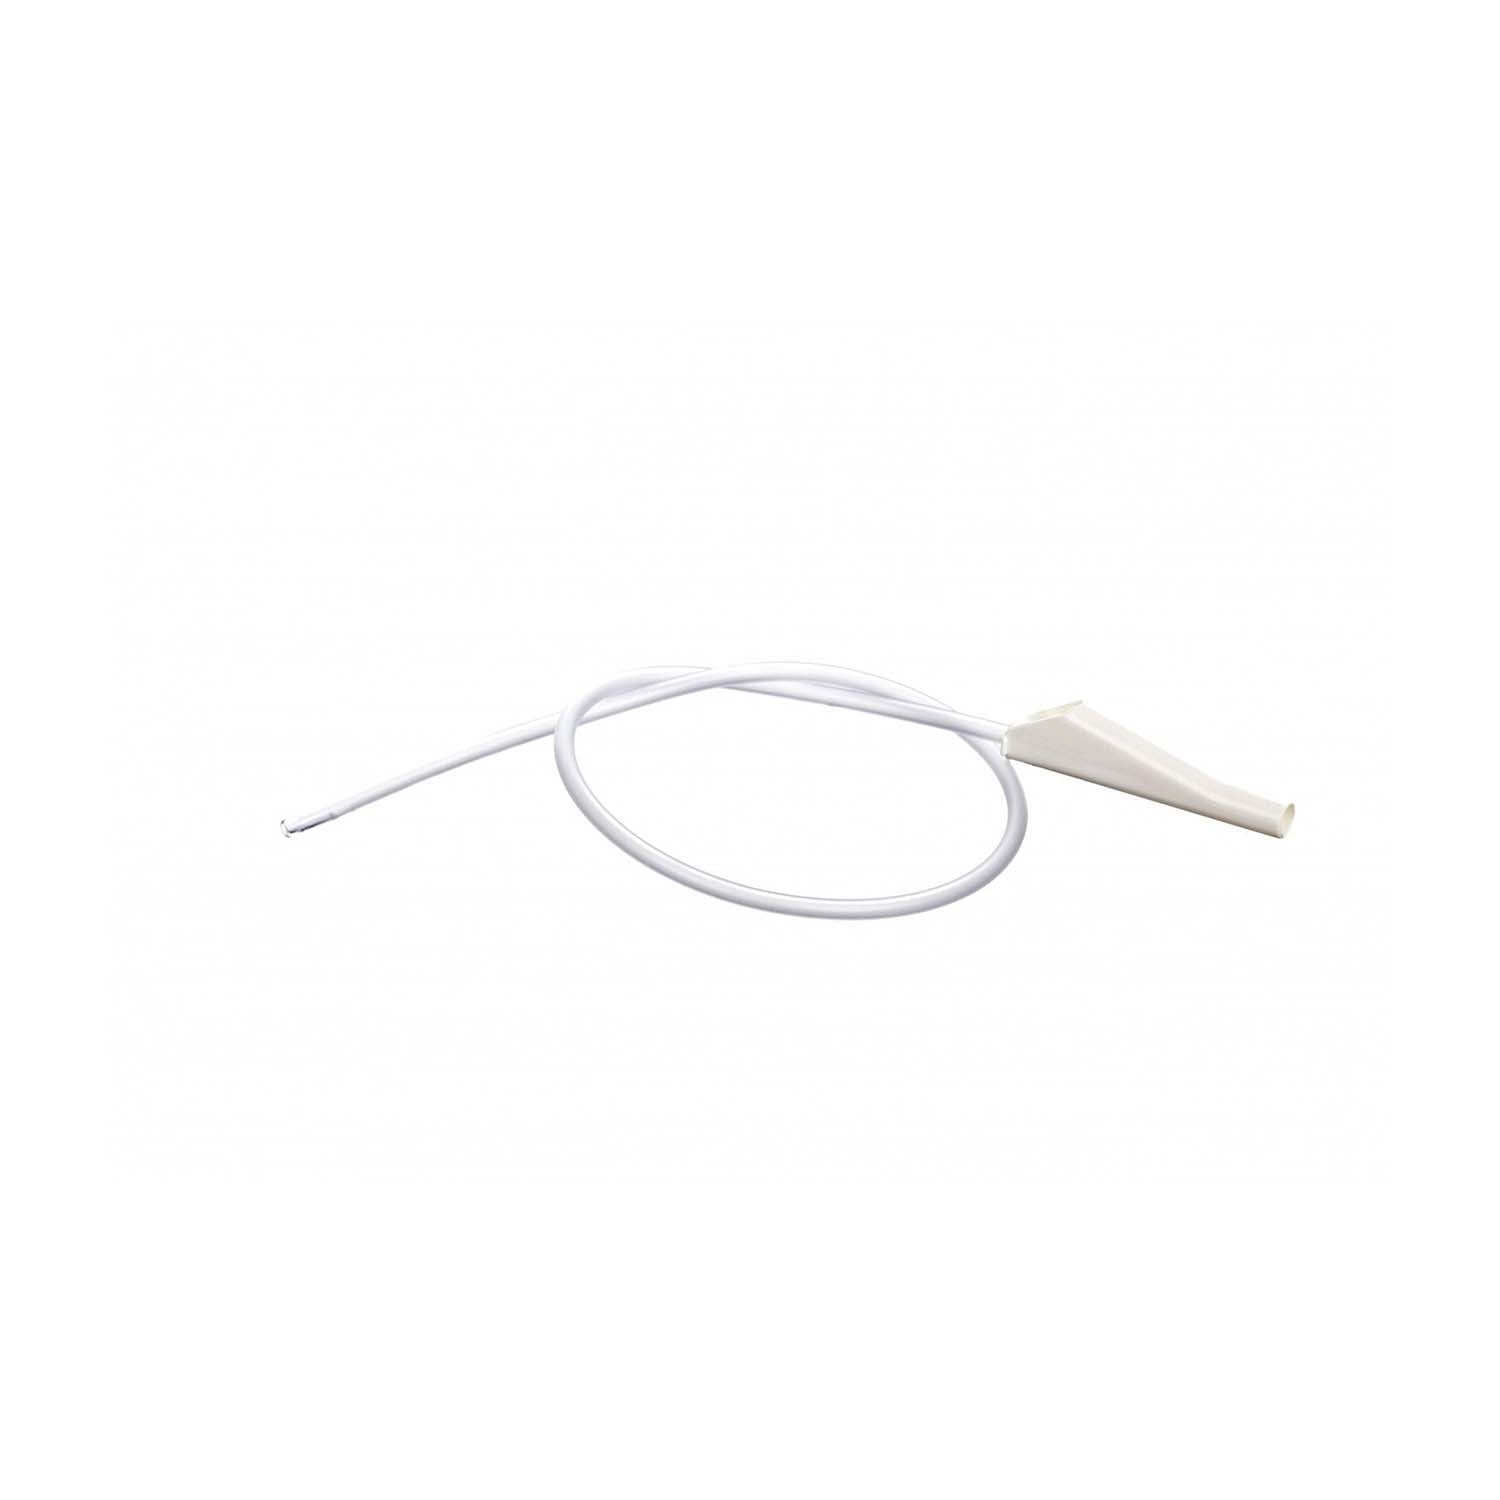 Pestrol Suction Catheters | Size 12 | Pack of 100